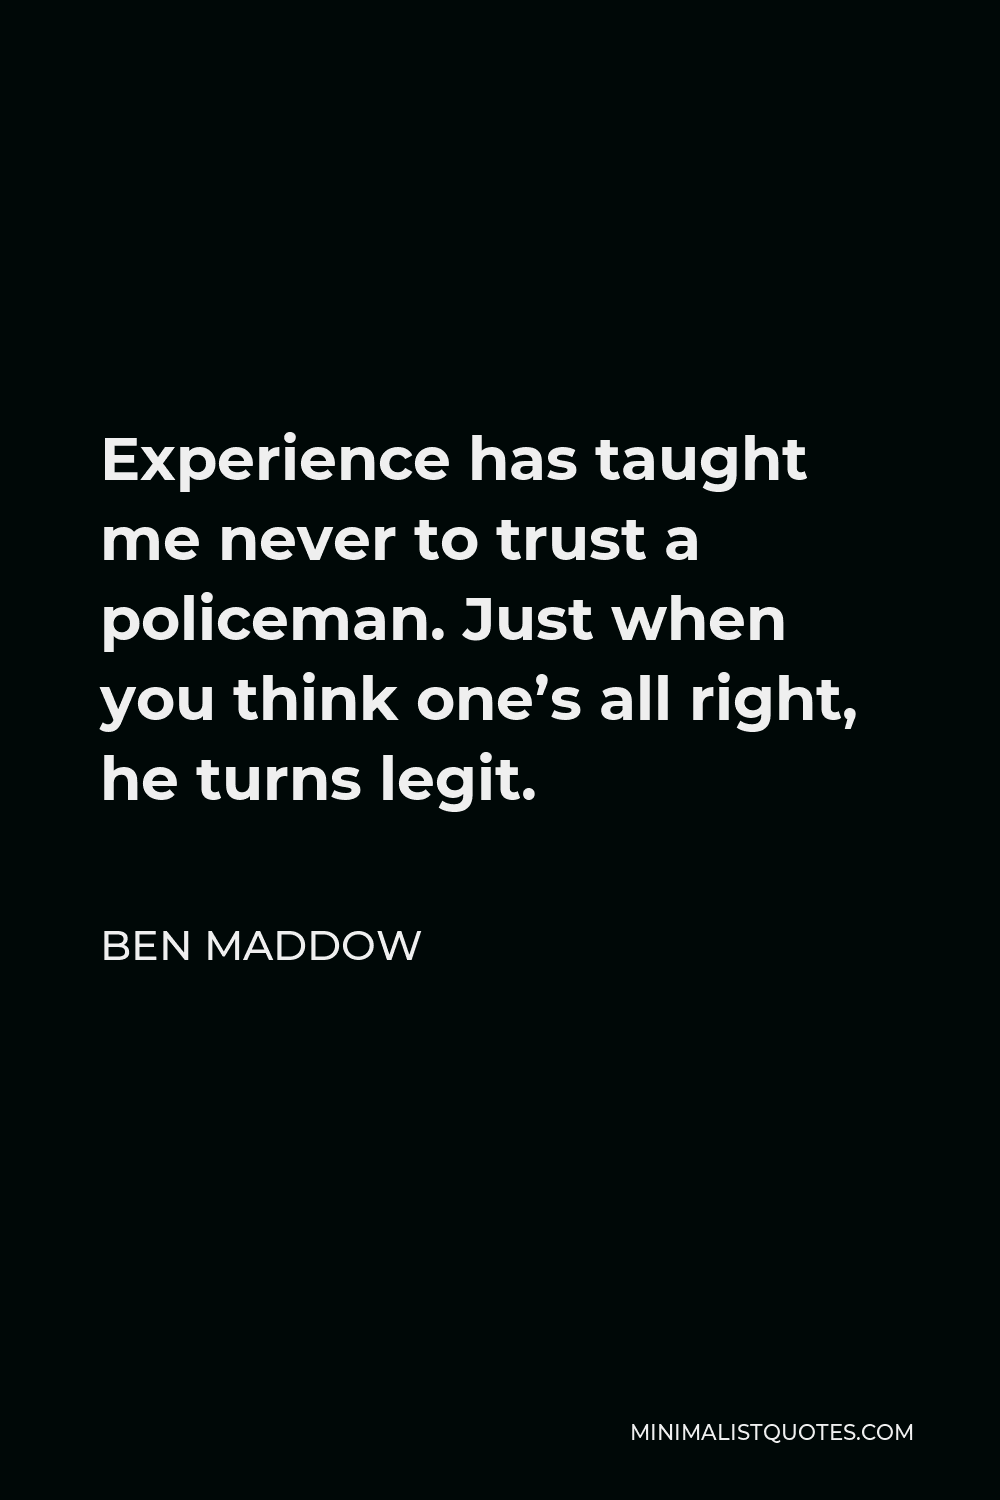 Ben Maddow Quote - Experience has taught me never to trust a policeman. Just when you think one’s all right, he turns legit.